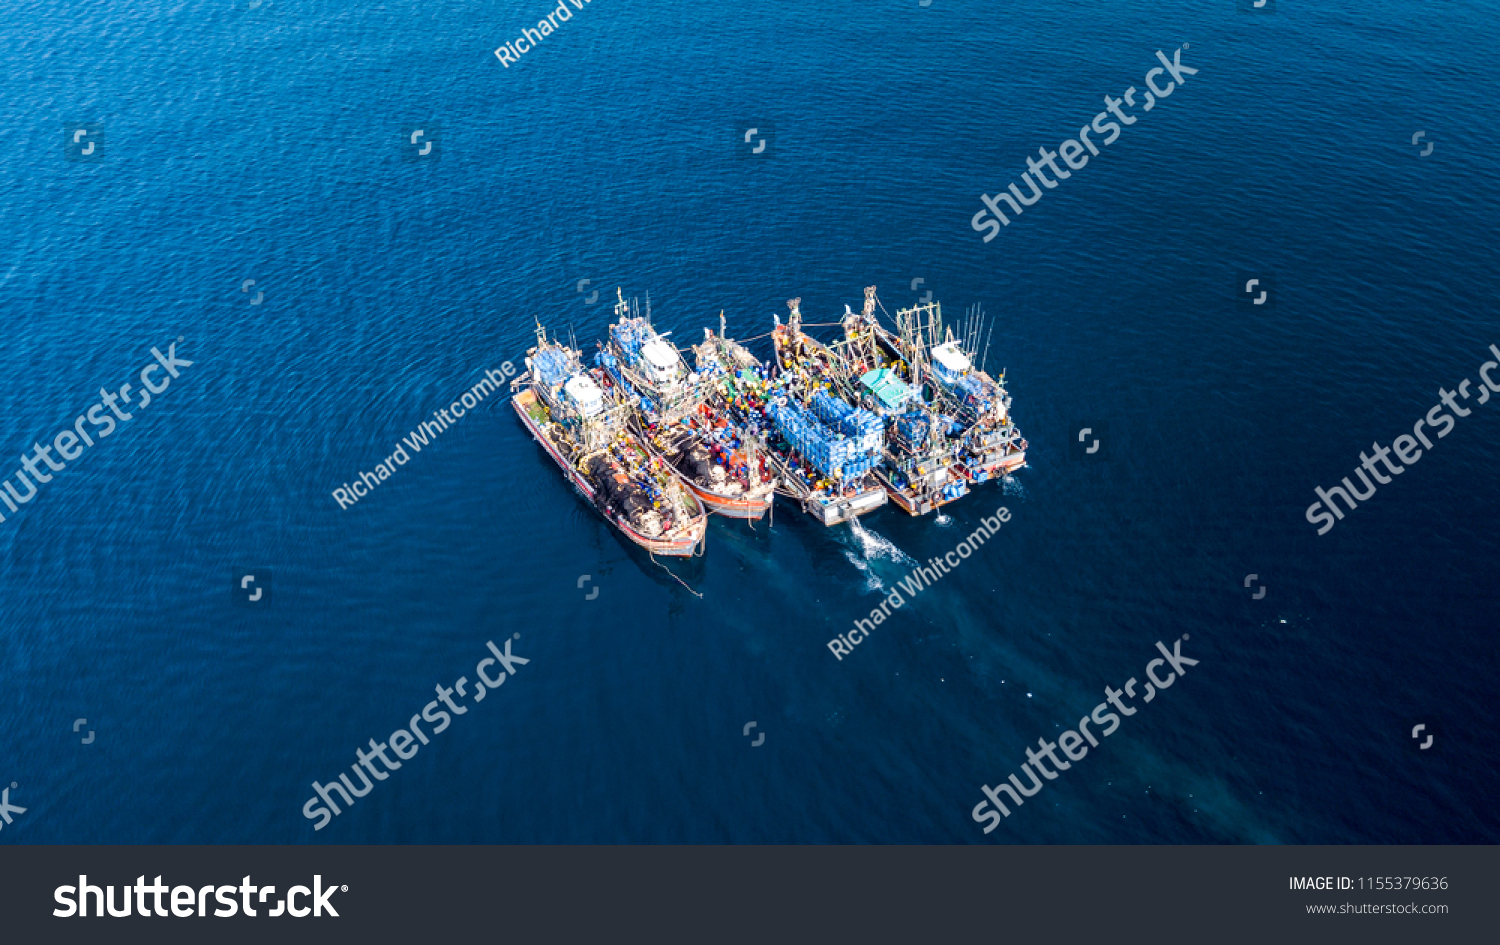 Aerial view of a large number of fishing trawlers operating together illegally in a marine reserve #1155379636